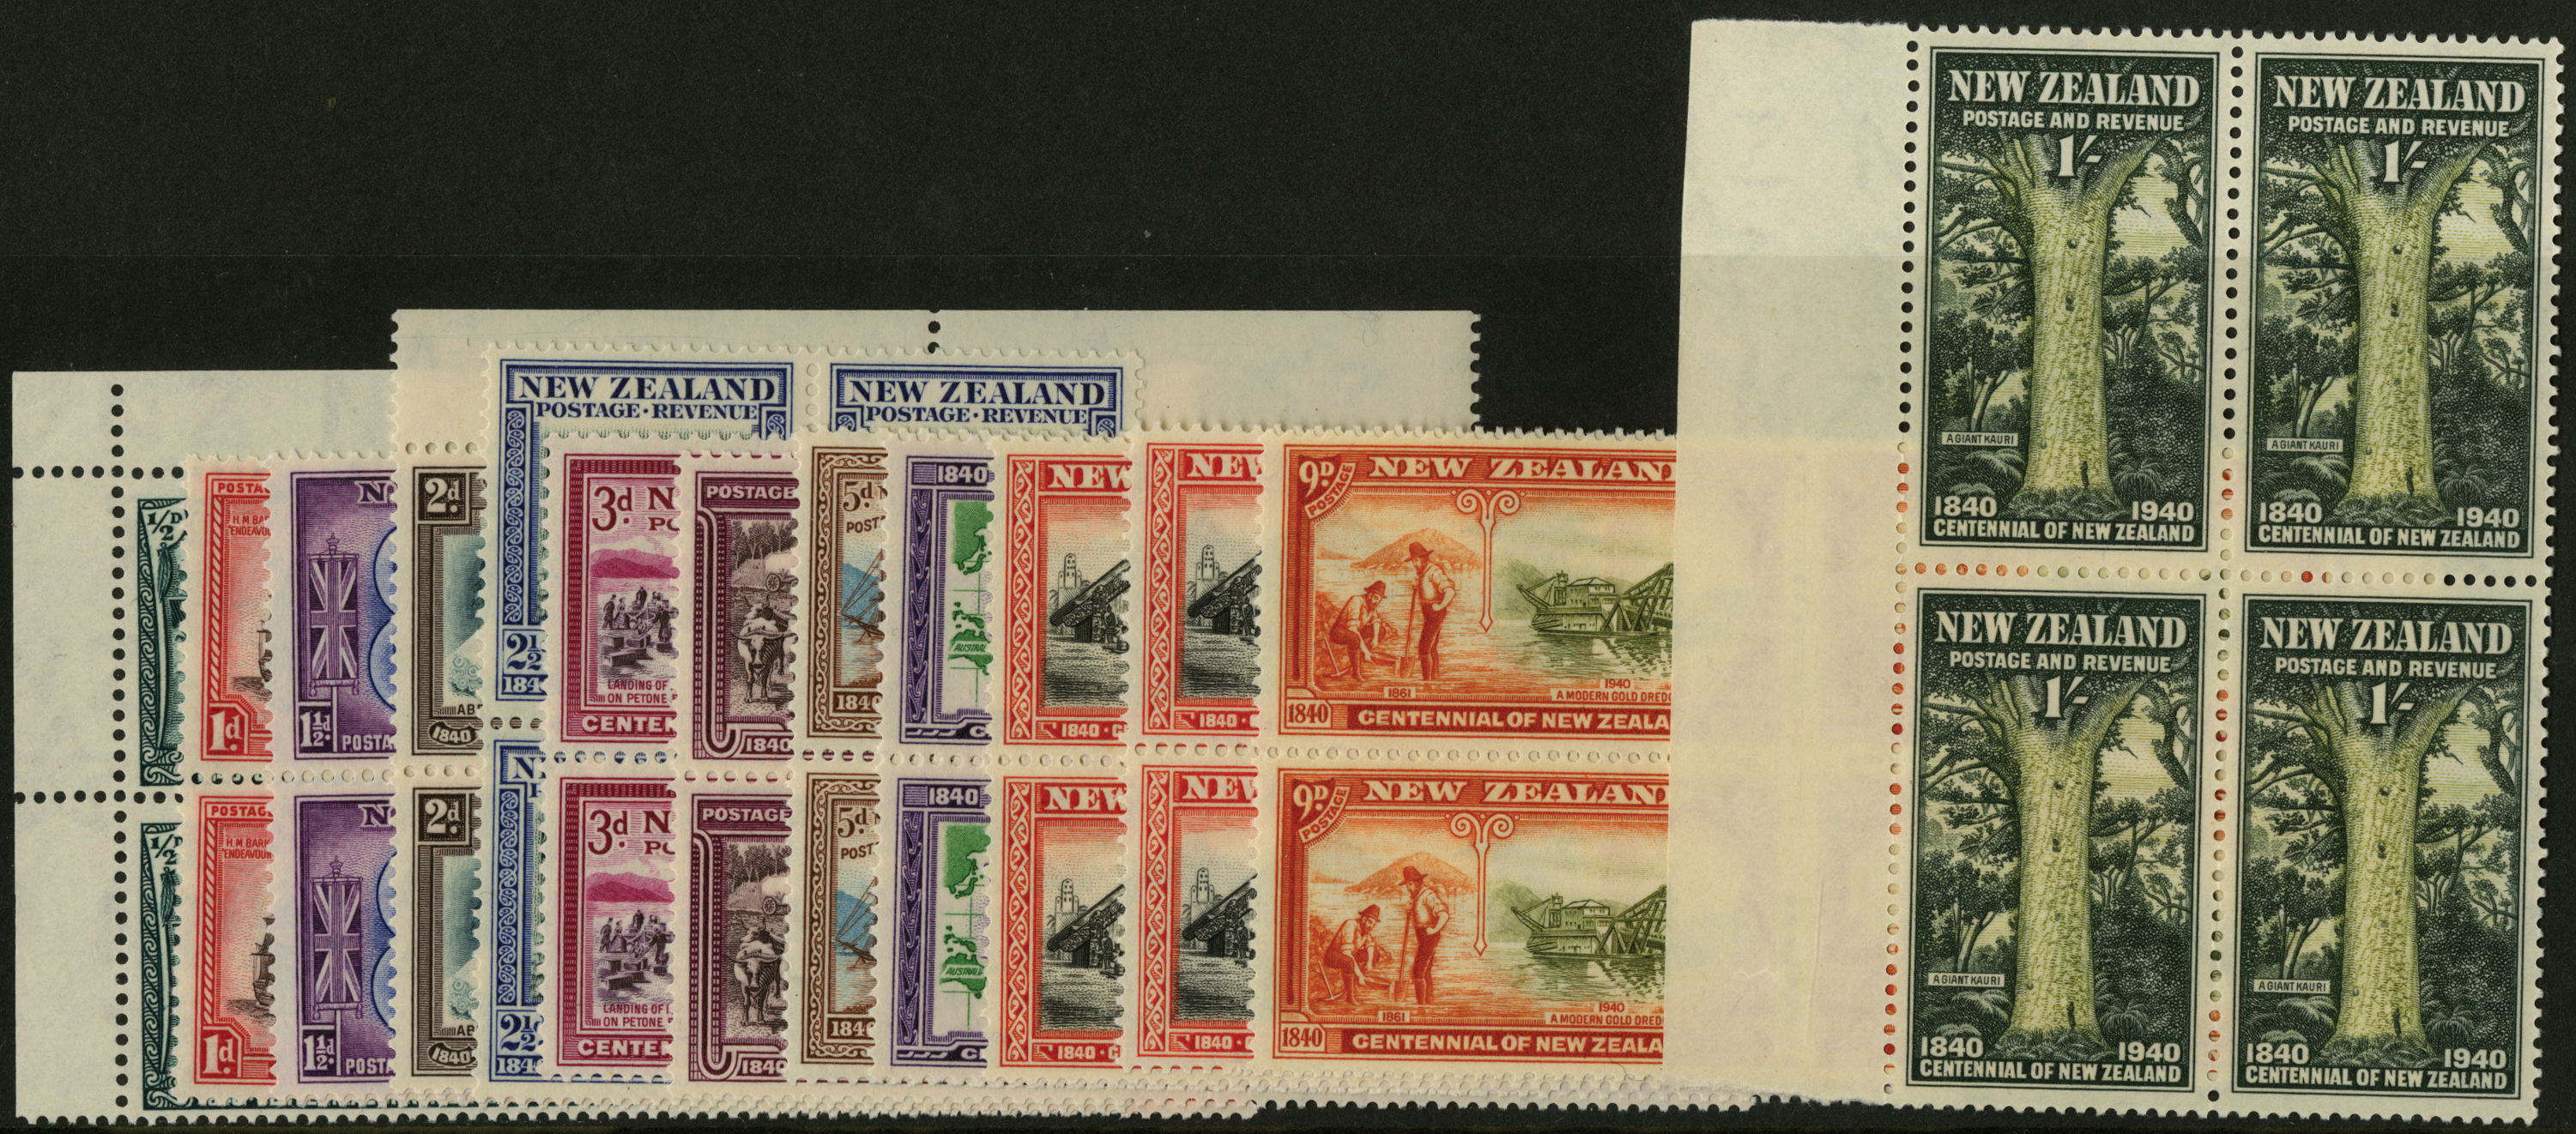 New Zealand. 1940 Centenary set of thirteen in unmounted mint blocks of four. SG 613-25 (£280)/CW